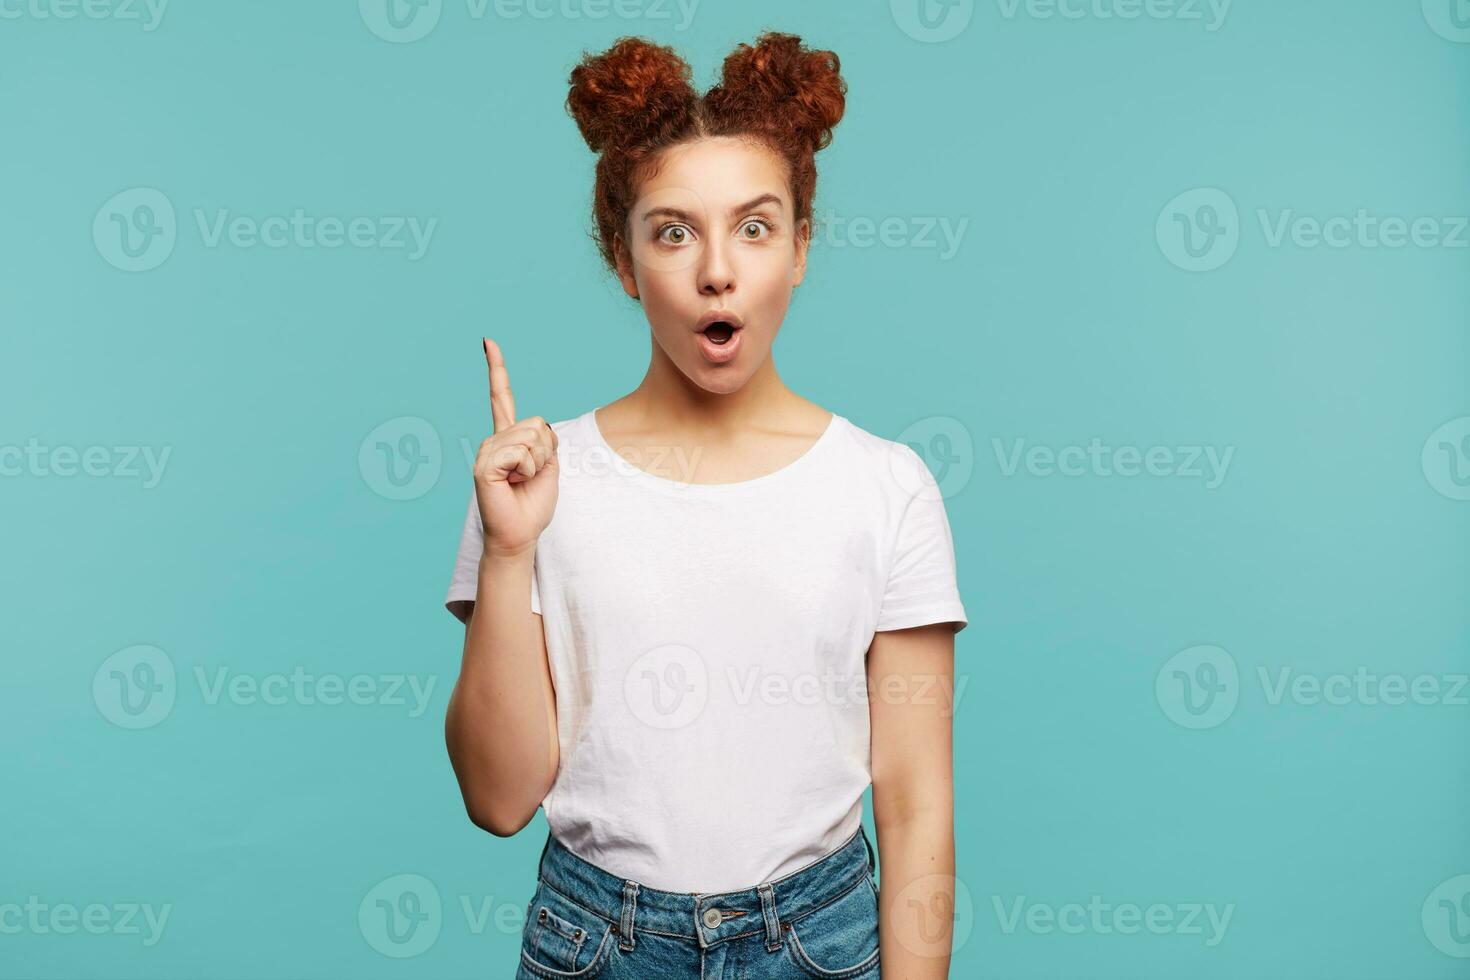 Open-eyed young brown haired curly woman raising hand as she is having idea and looking at camera with agitated face, dressed in white basic t-shirt and jeans while posing over blue background photo